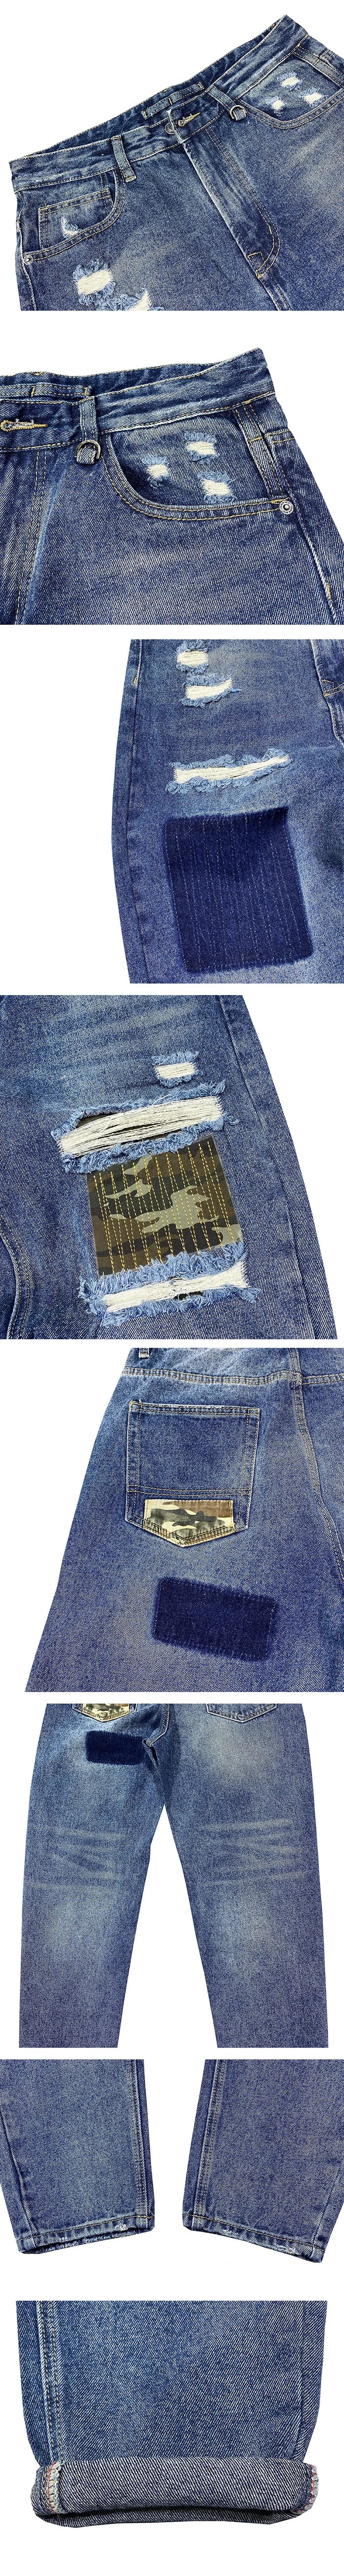 details of the Ripped jeans men "Kure"